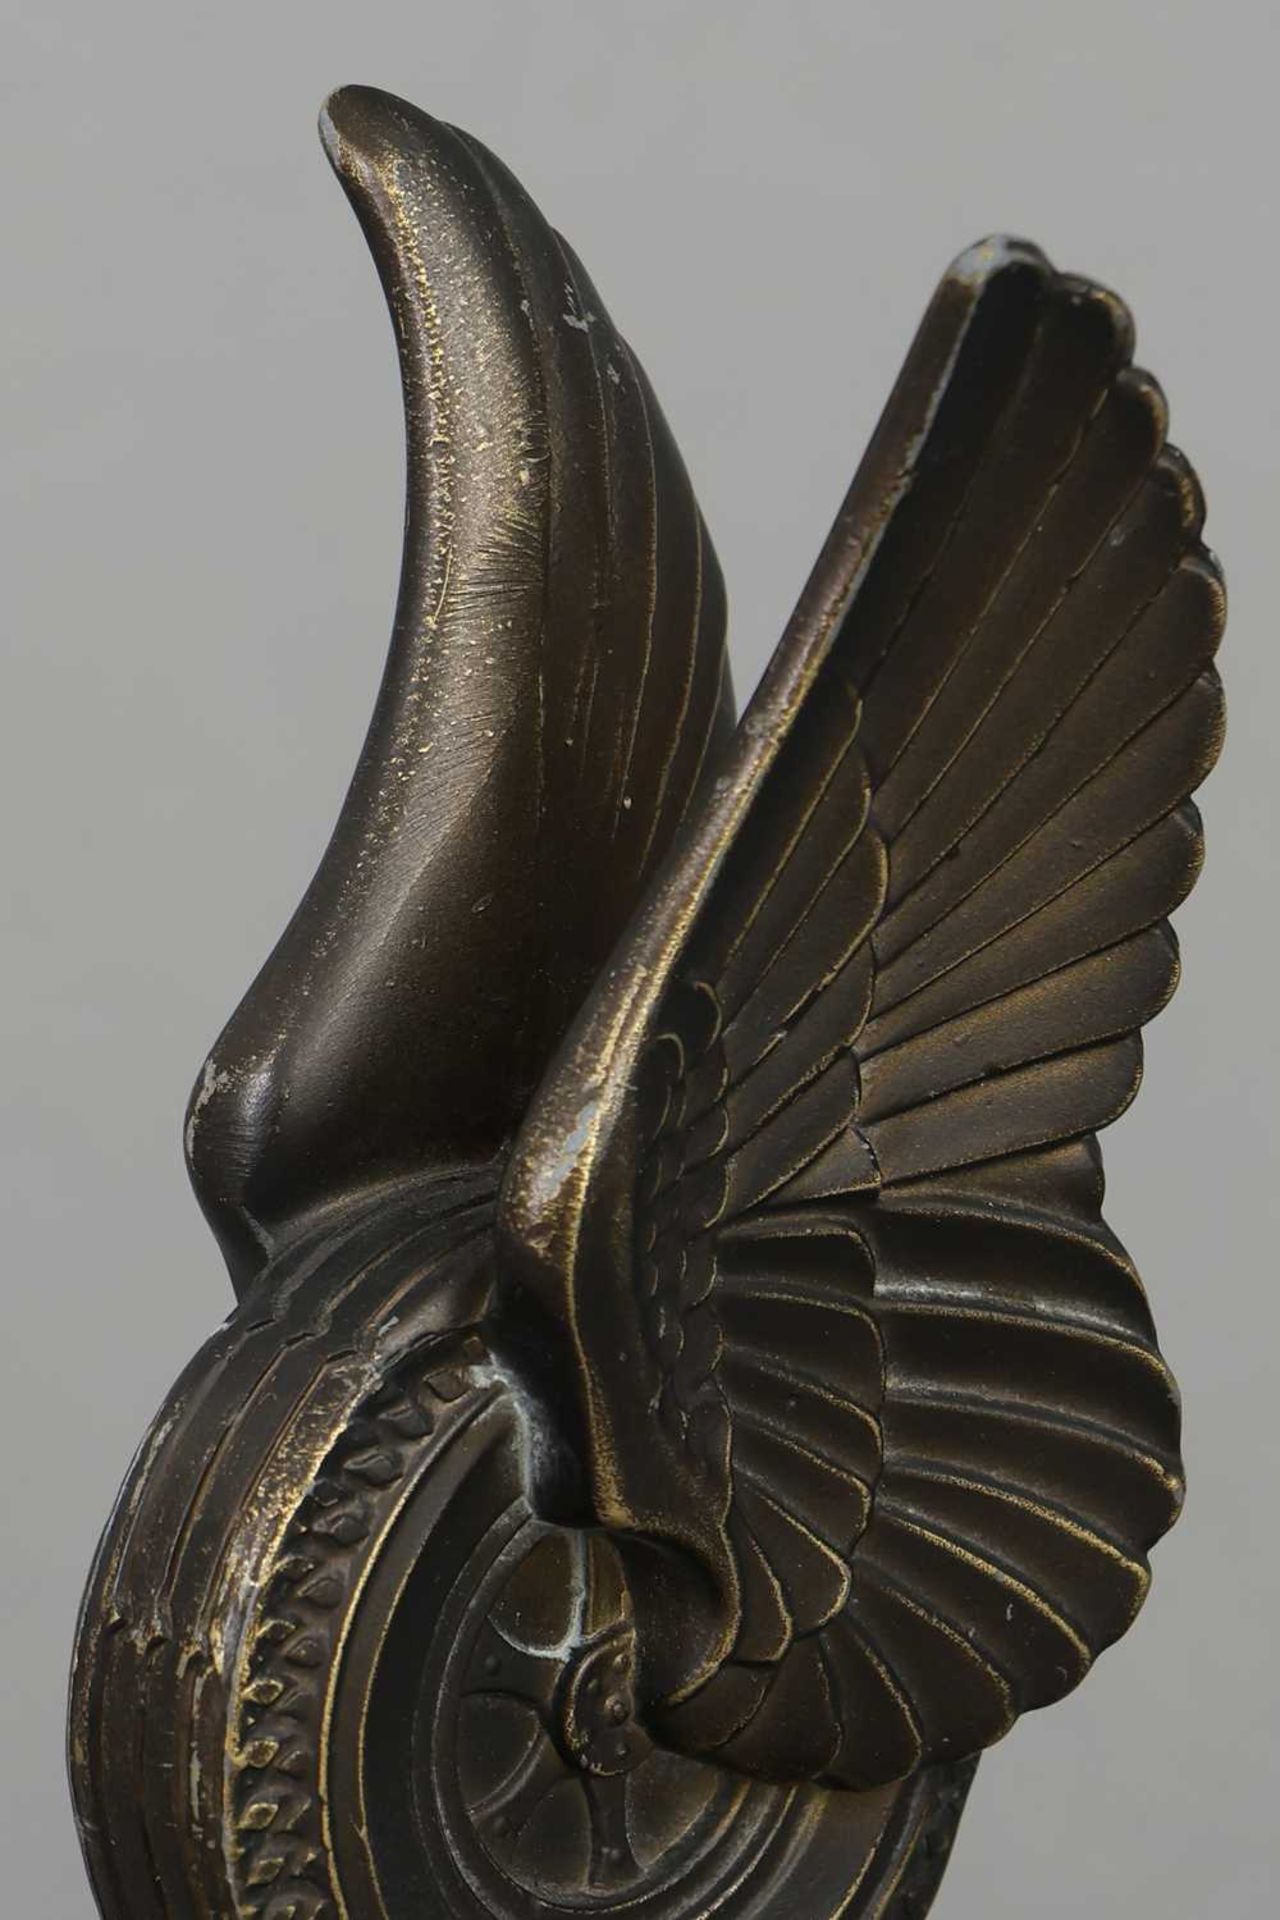 Automobilia Paperweight "Winged Wheel" - Image 3 of 3